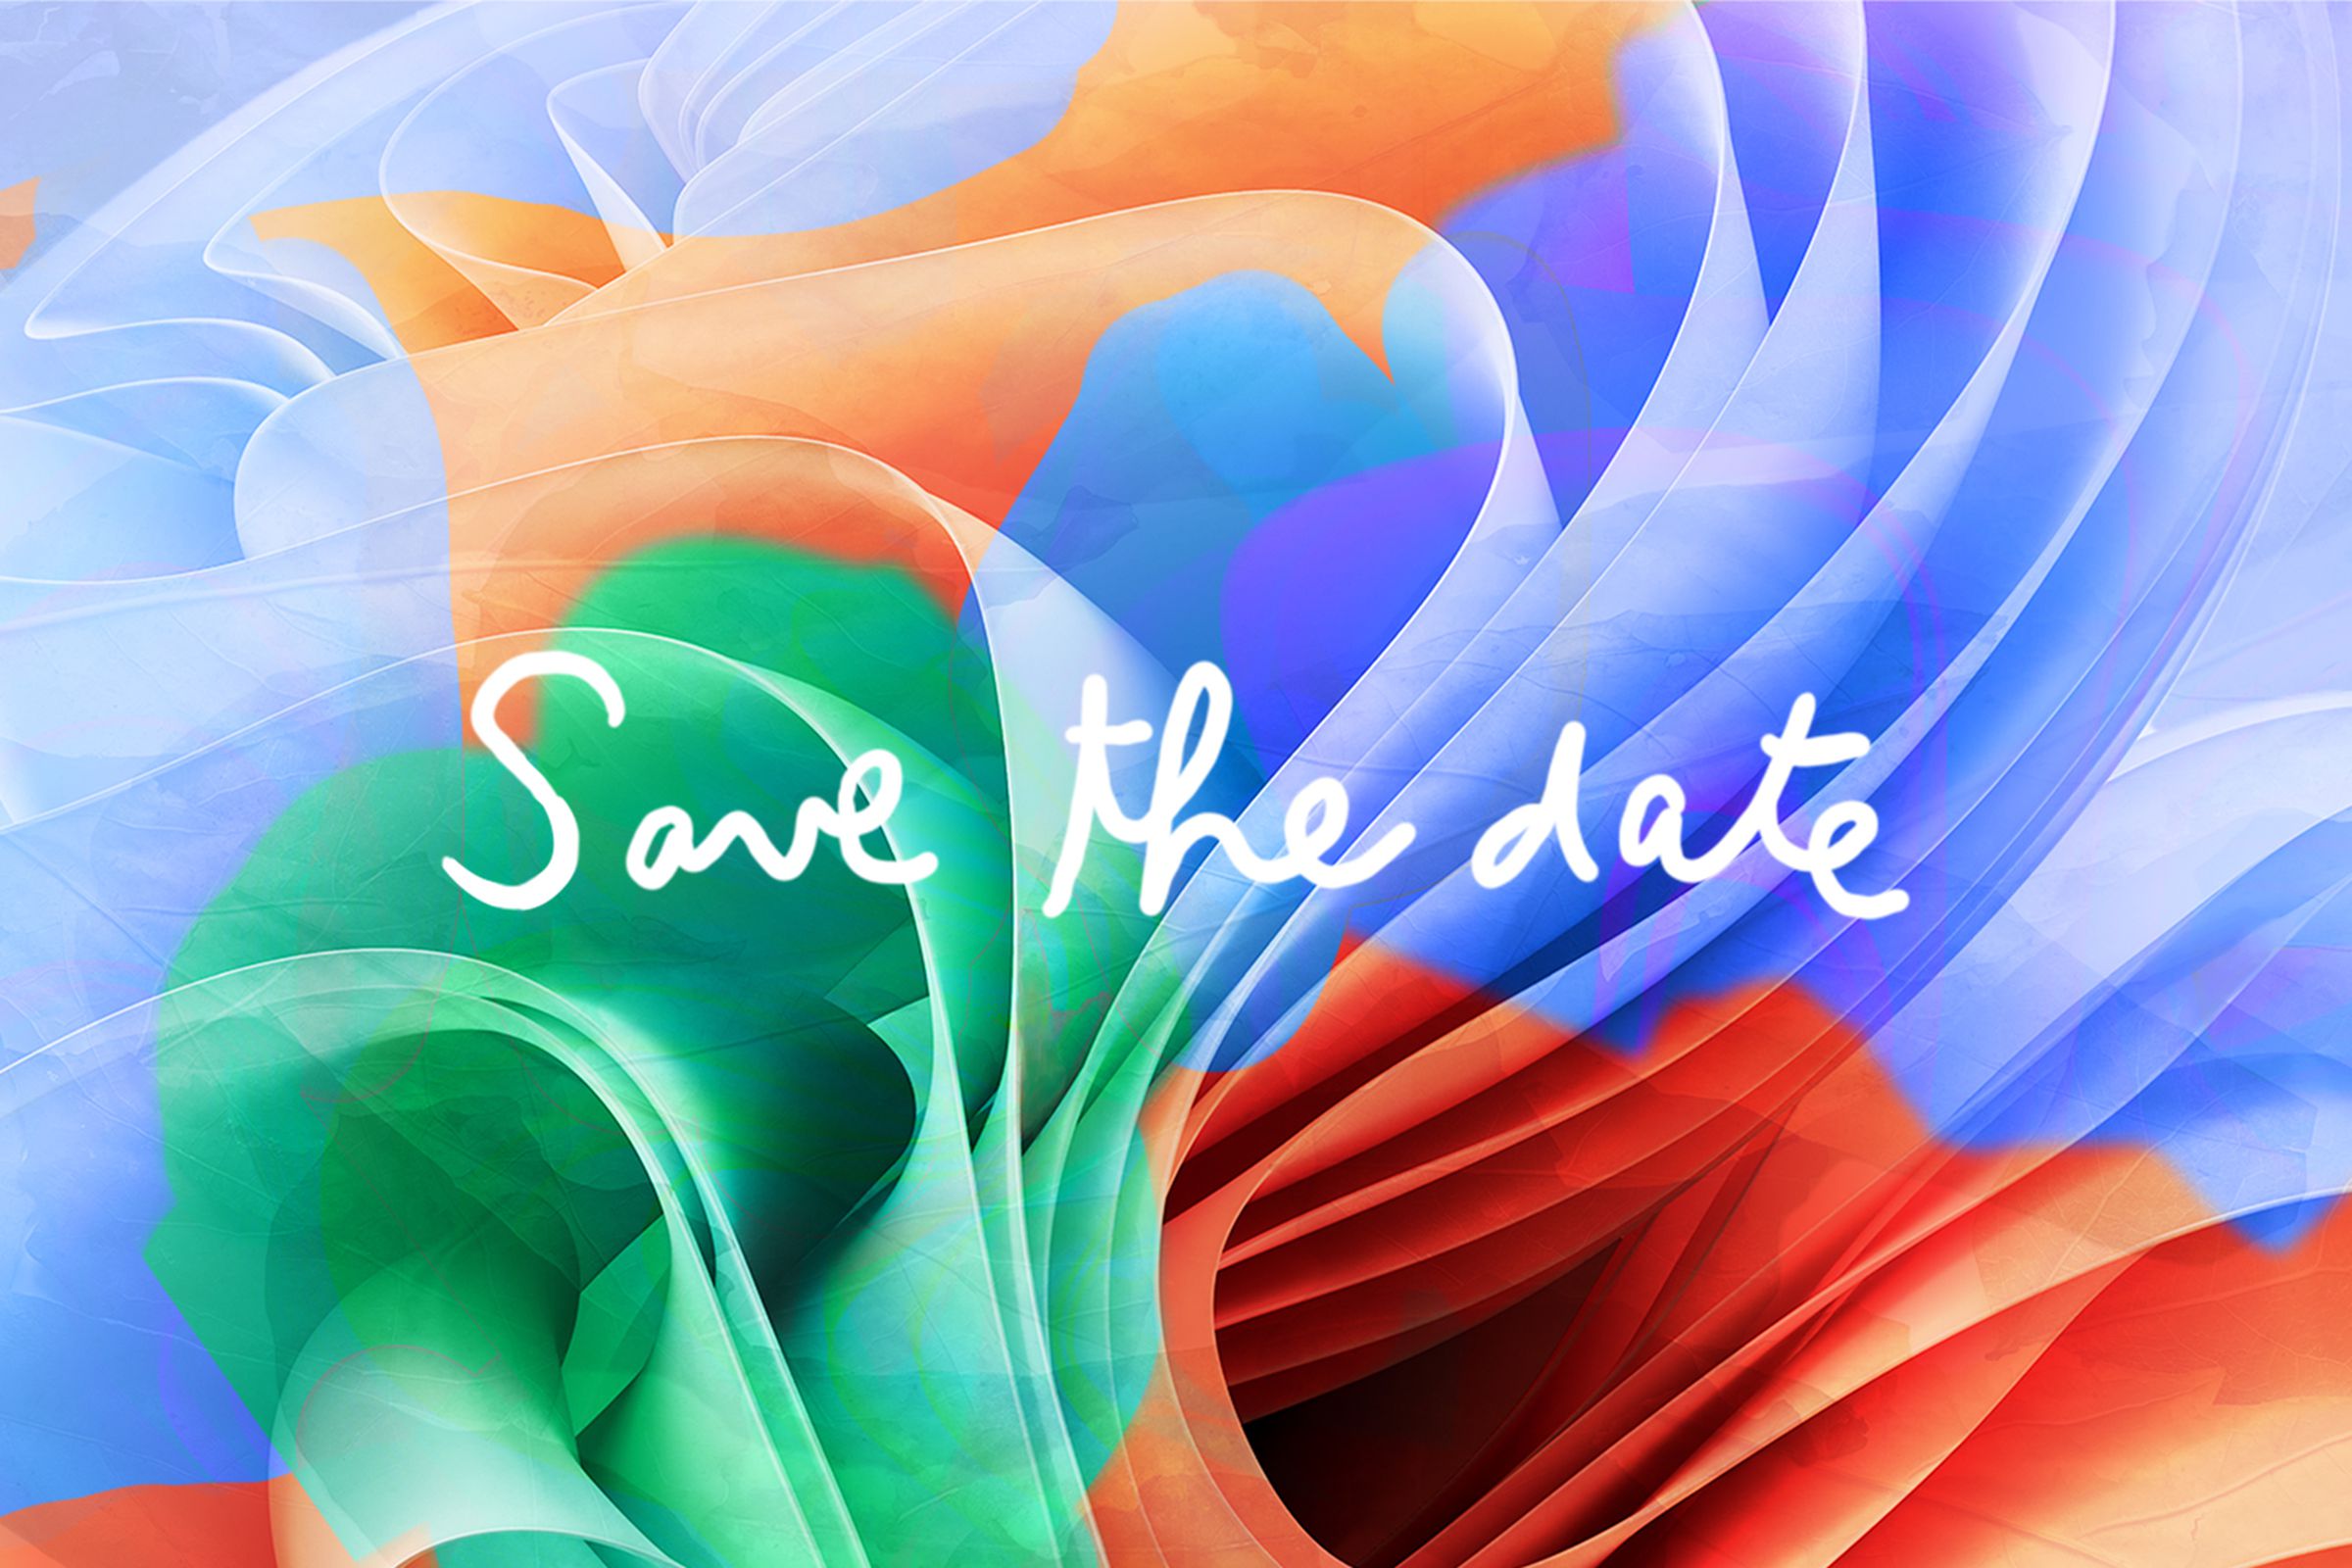 A stock photo with the text “Save the date” on a colorful backdrop